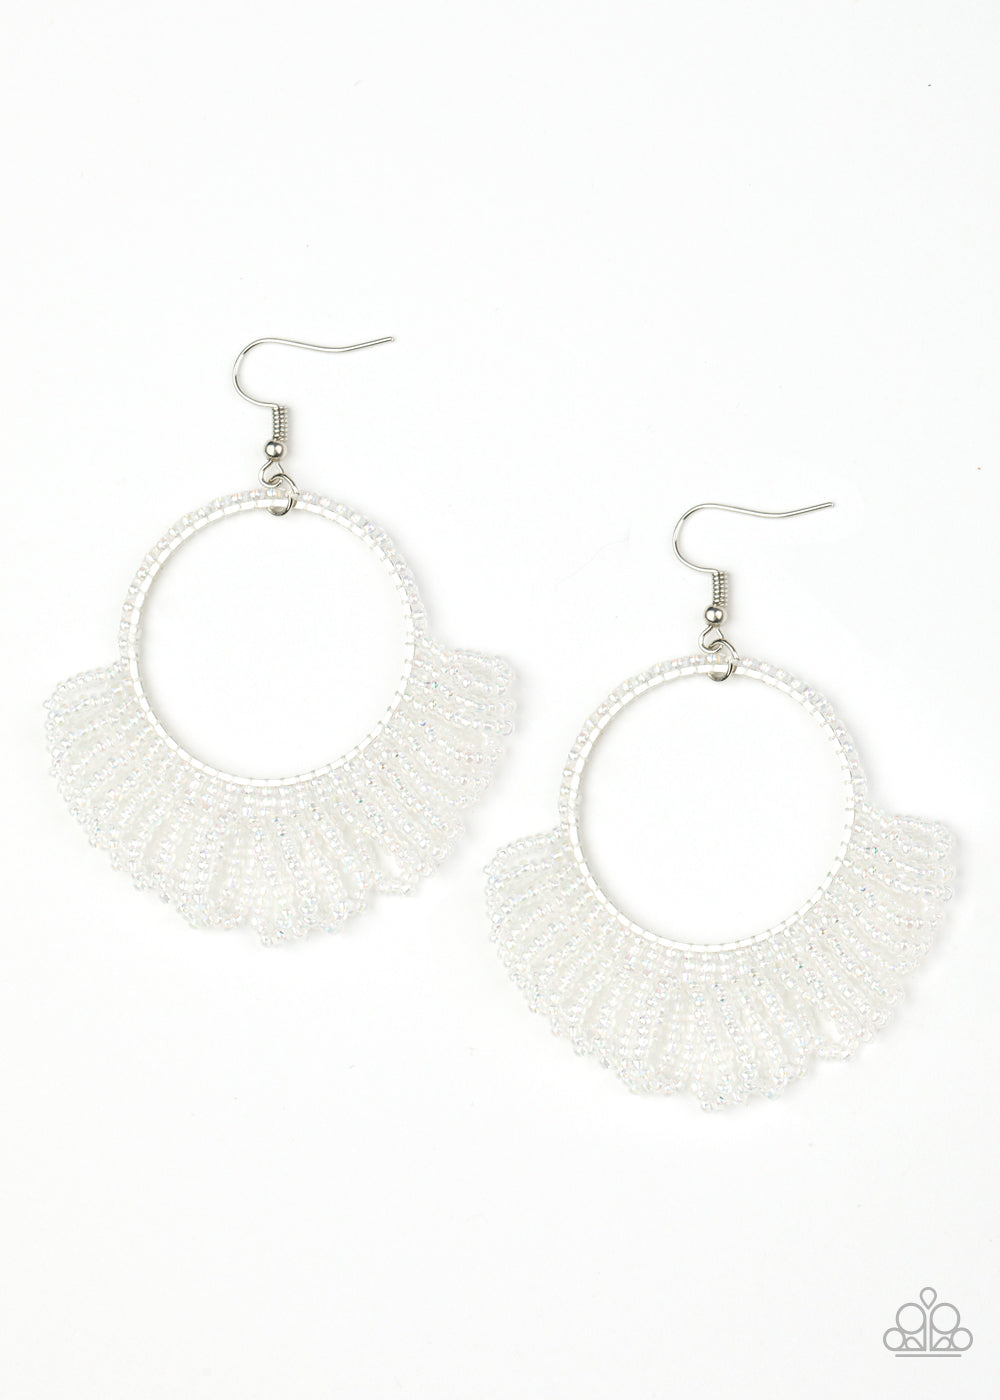 Paparazzi Accessories - Cant BEAD-lieve My Eyes! -  #E373 Multi Earrings